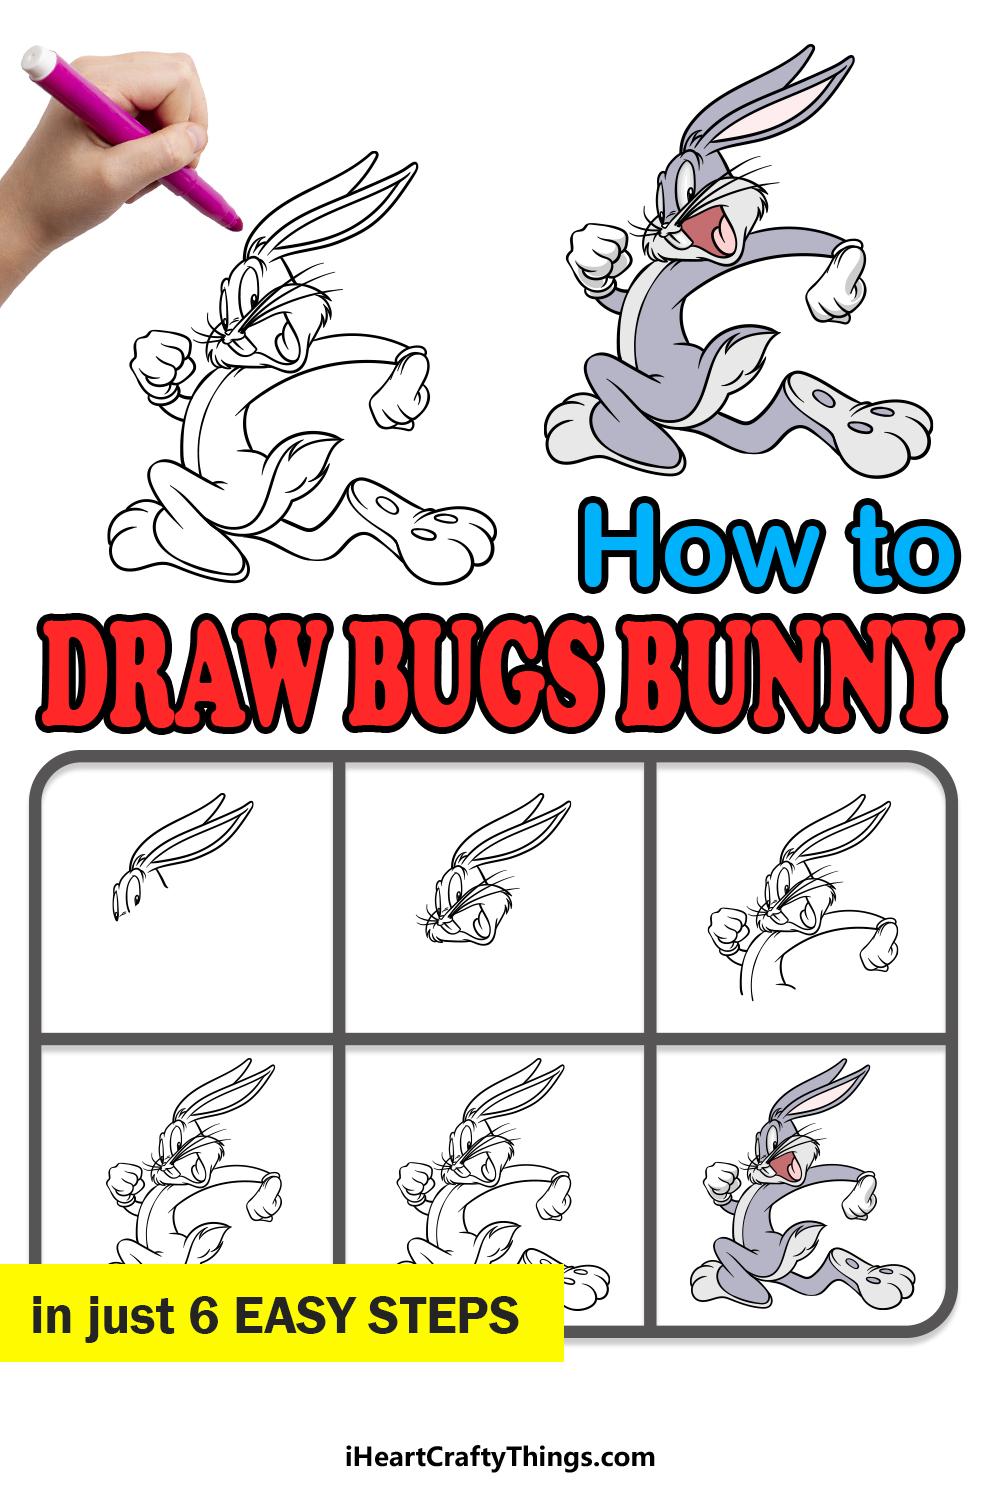 how to draw Bugs Bunny in 6 easy steps